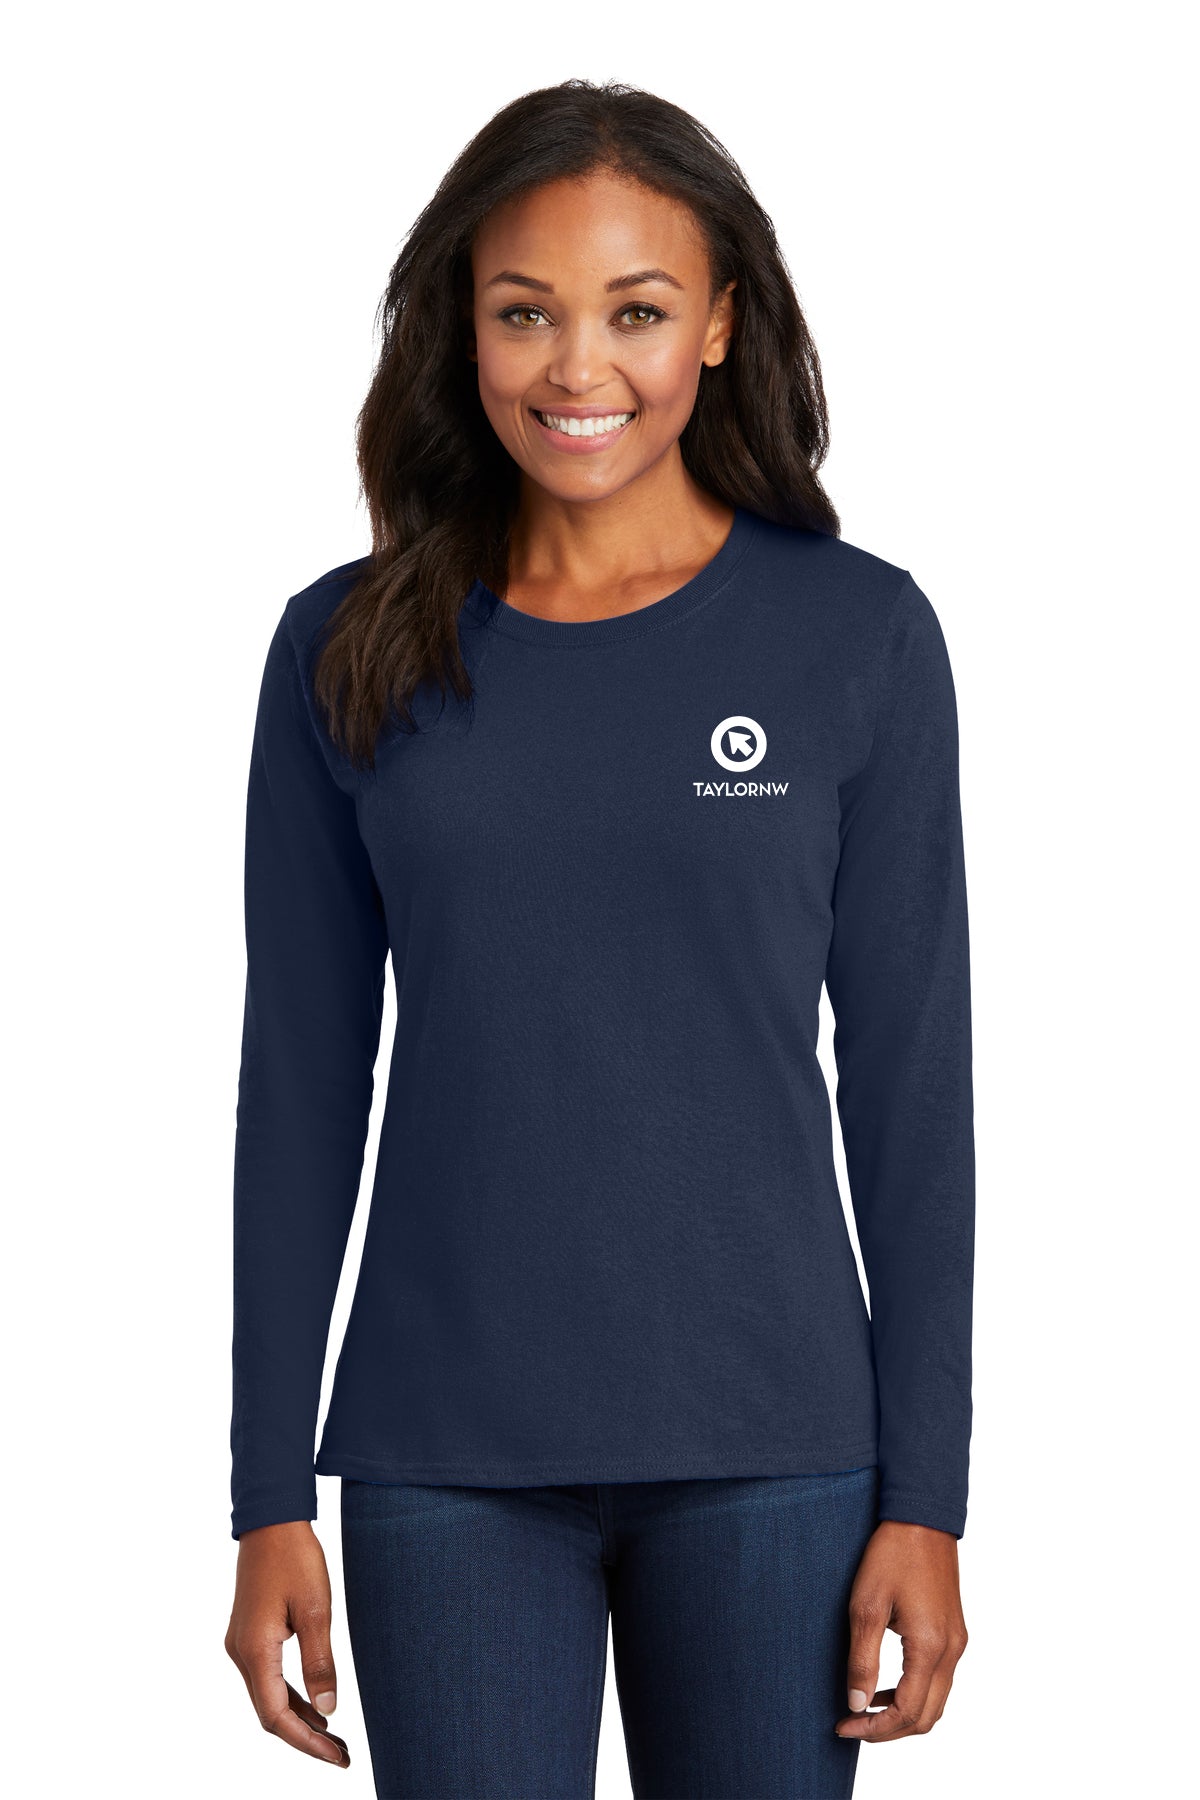 Taylor NW Ladies Long Sleeve – Multiple Colors